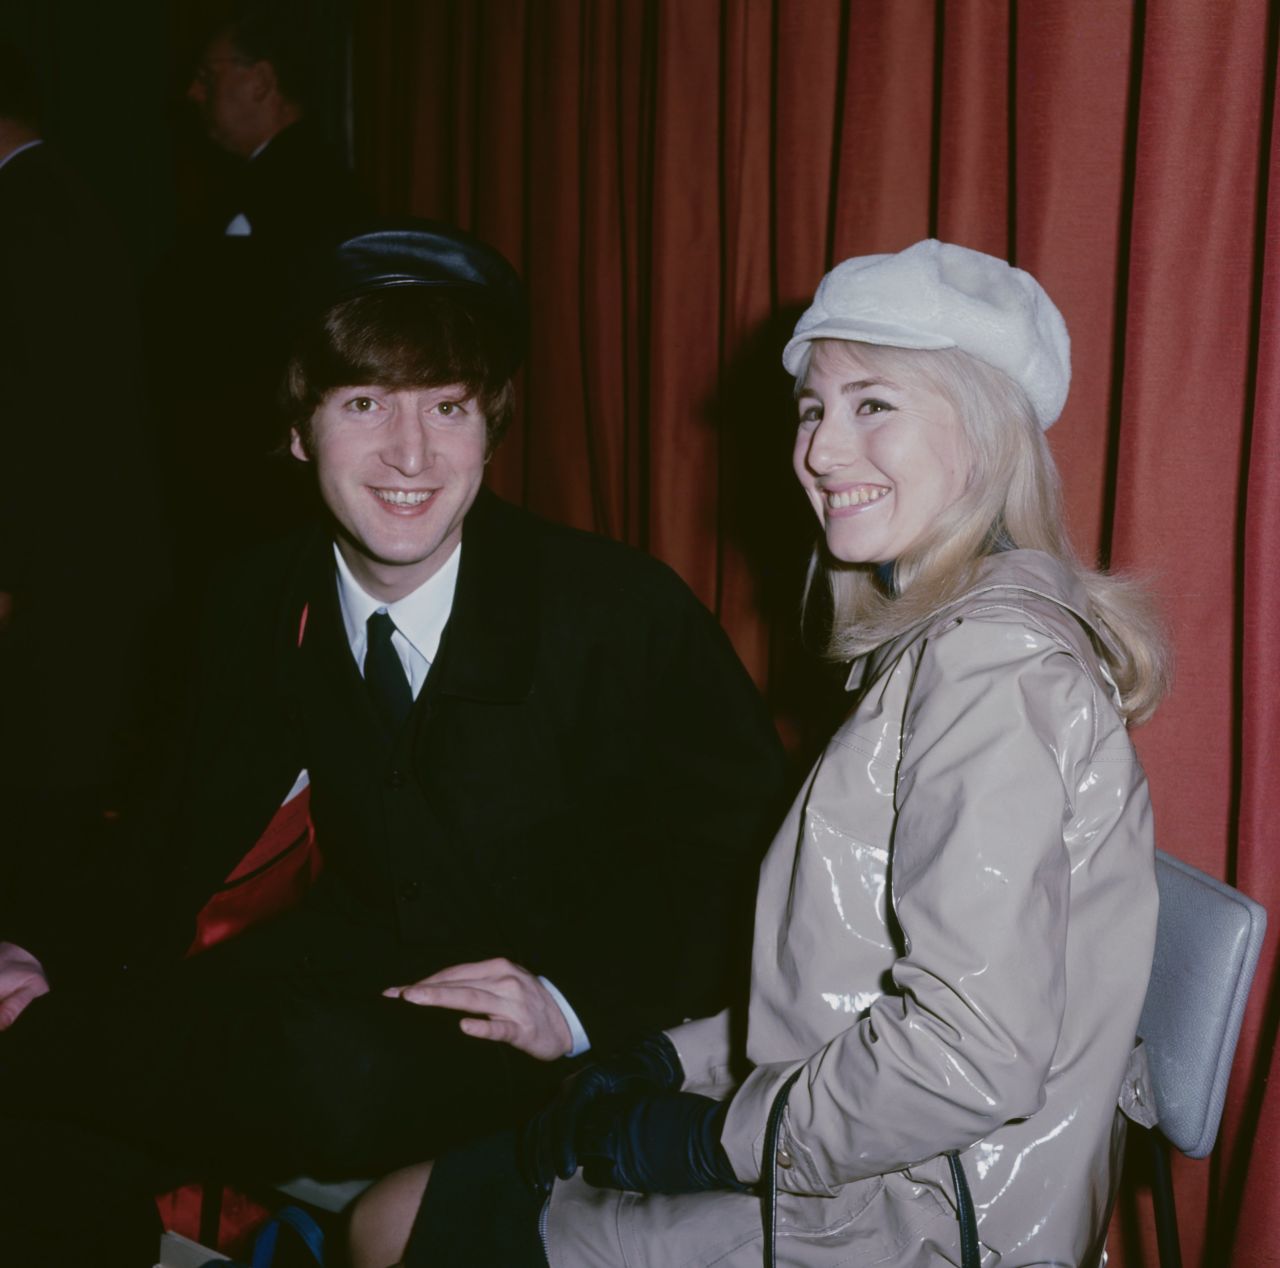 <a href="http://www.cnn.com/2015/04/01/entertainment/cynthia-lennon-obit/index.html">Cynthia Lennon</a>, the first wife of John Lennon, died April 1, according to a post on the website of her son, Julian. She was 75.